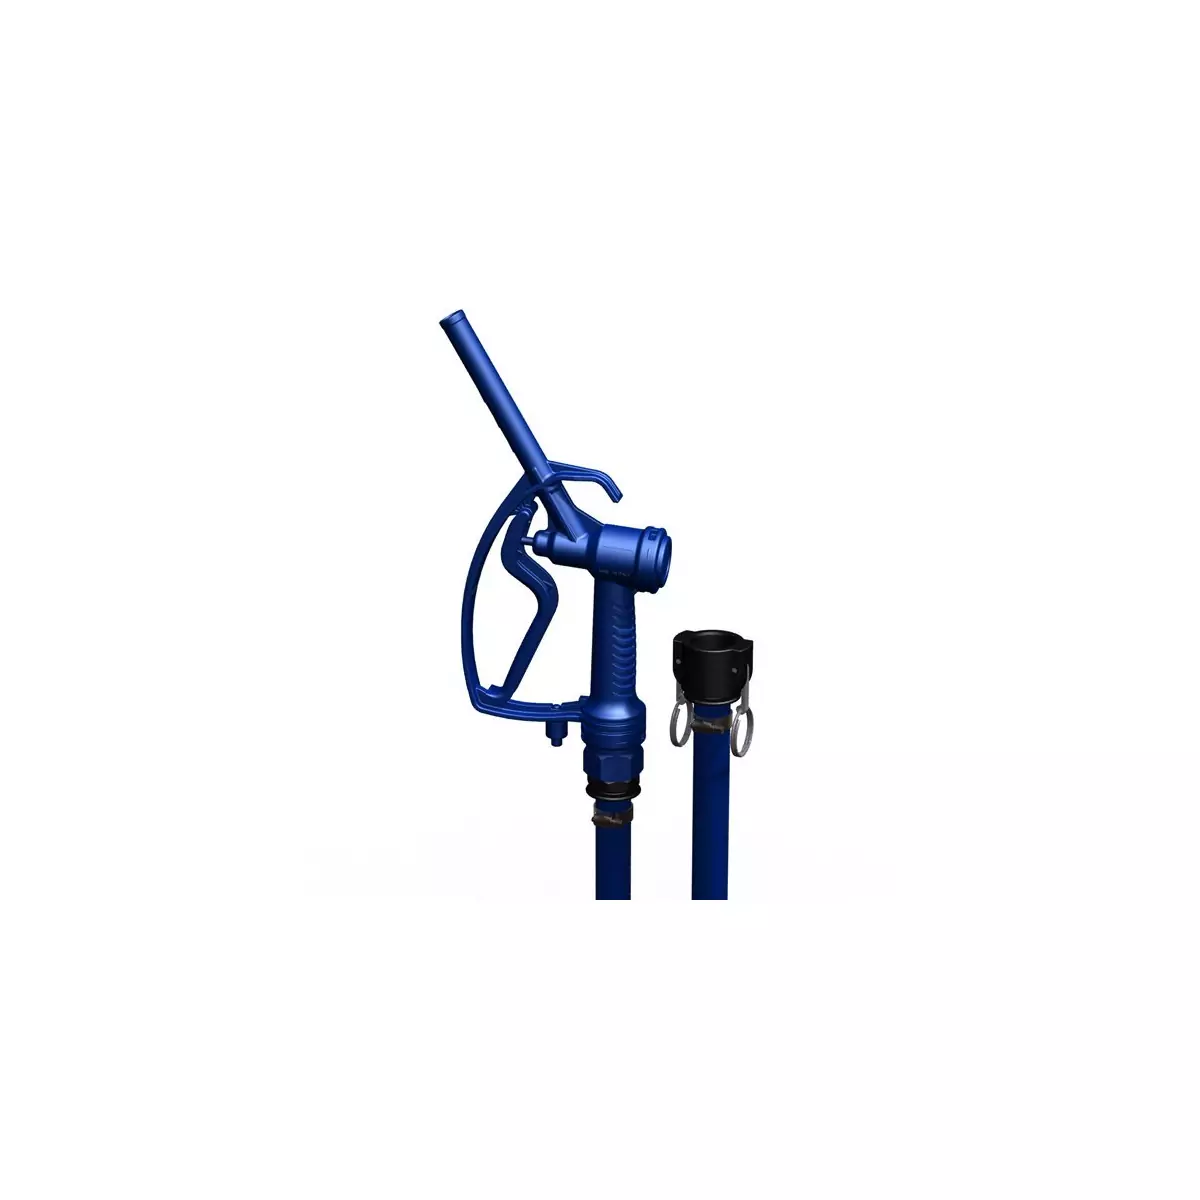 Drain gun outlet 19mm with 3ml hose and camlock fitting